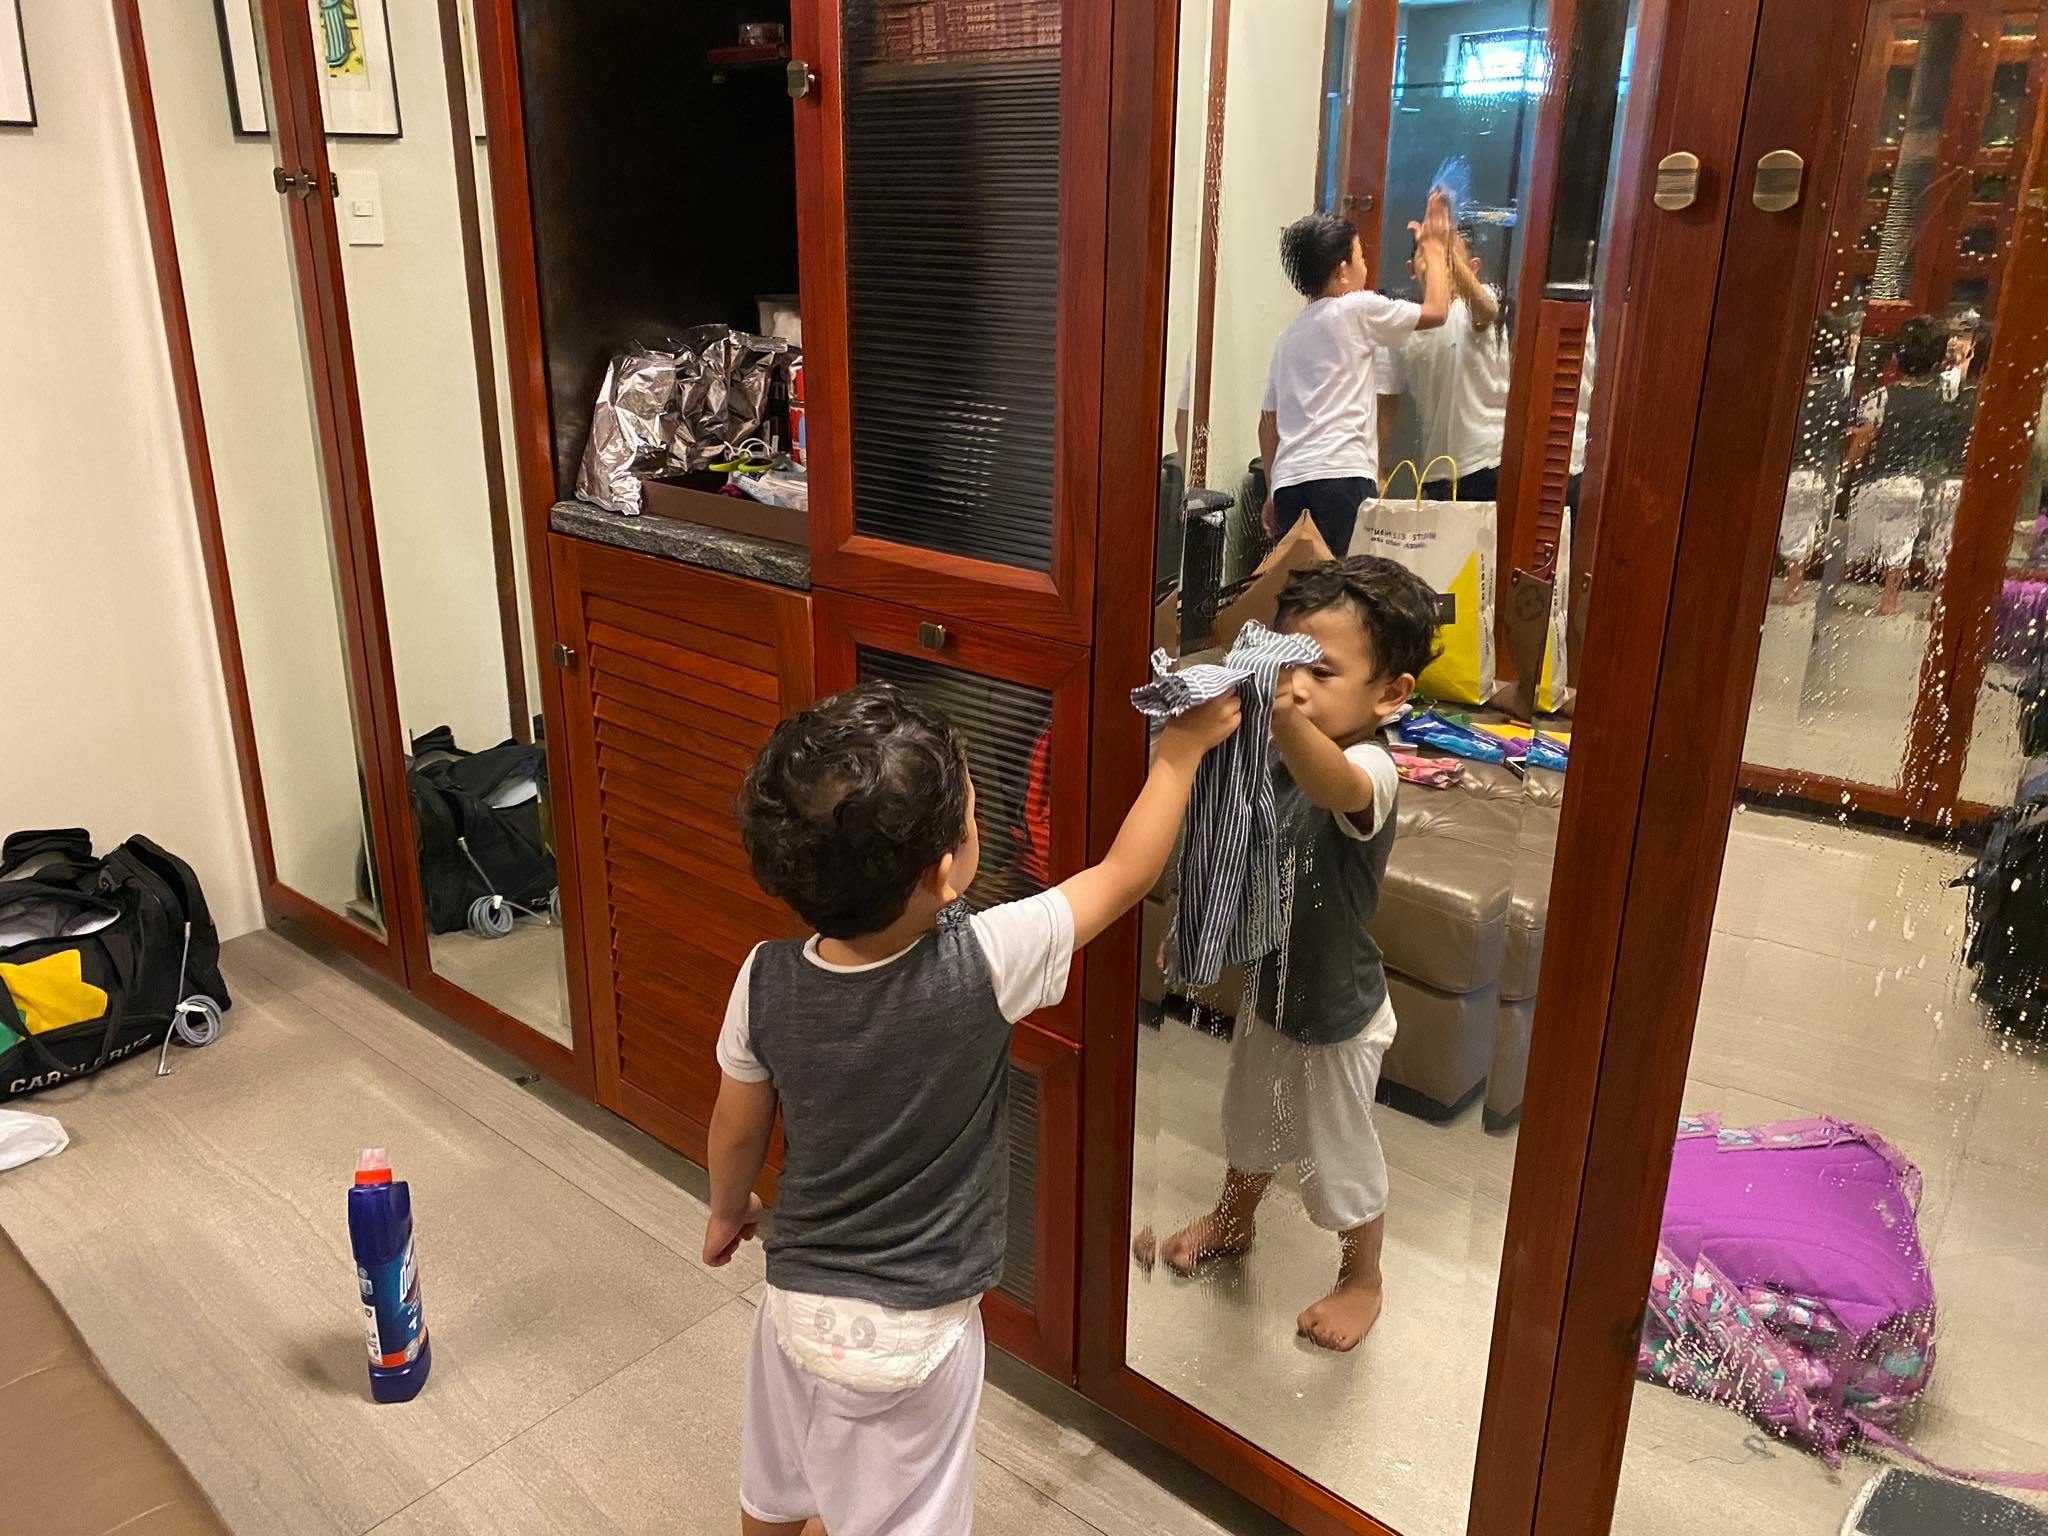 KEEPING CLEAN. Nikki's kids get a hands-on lesson about the coronavirus – and how to avoid it by keeping surfaces clean. Photo courtesy of Nikki Briones Carsi-Cruz 